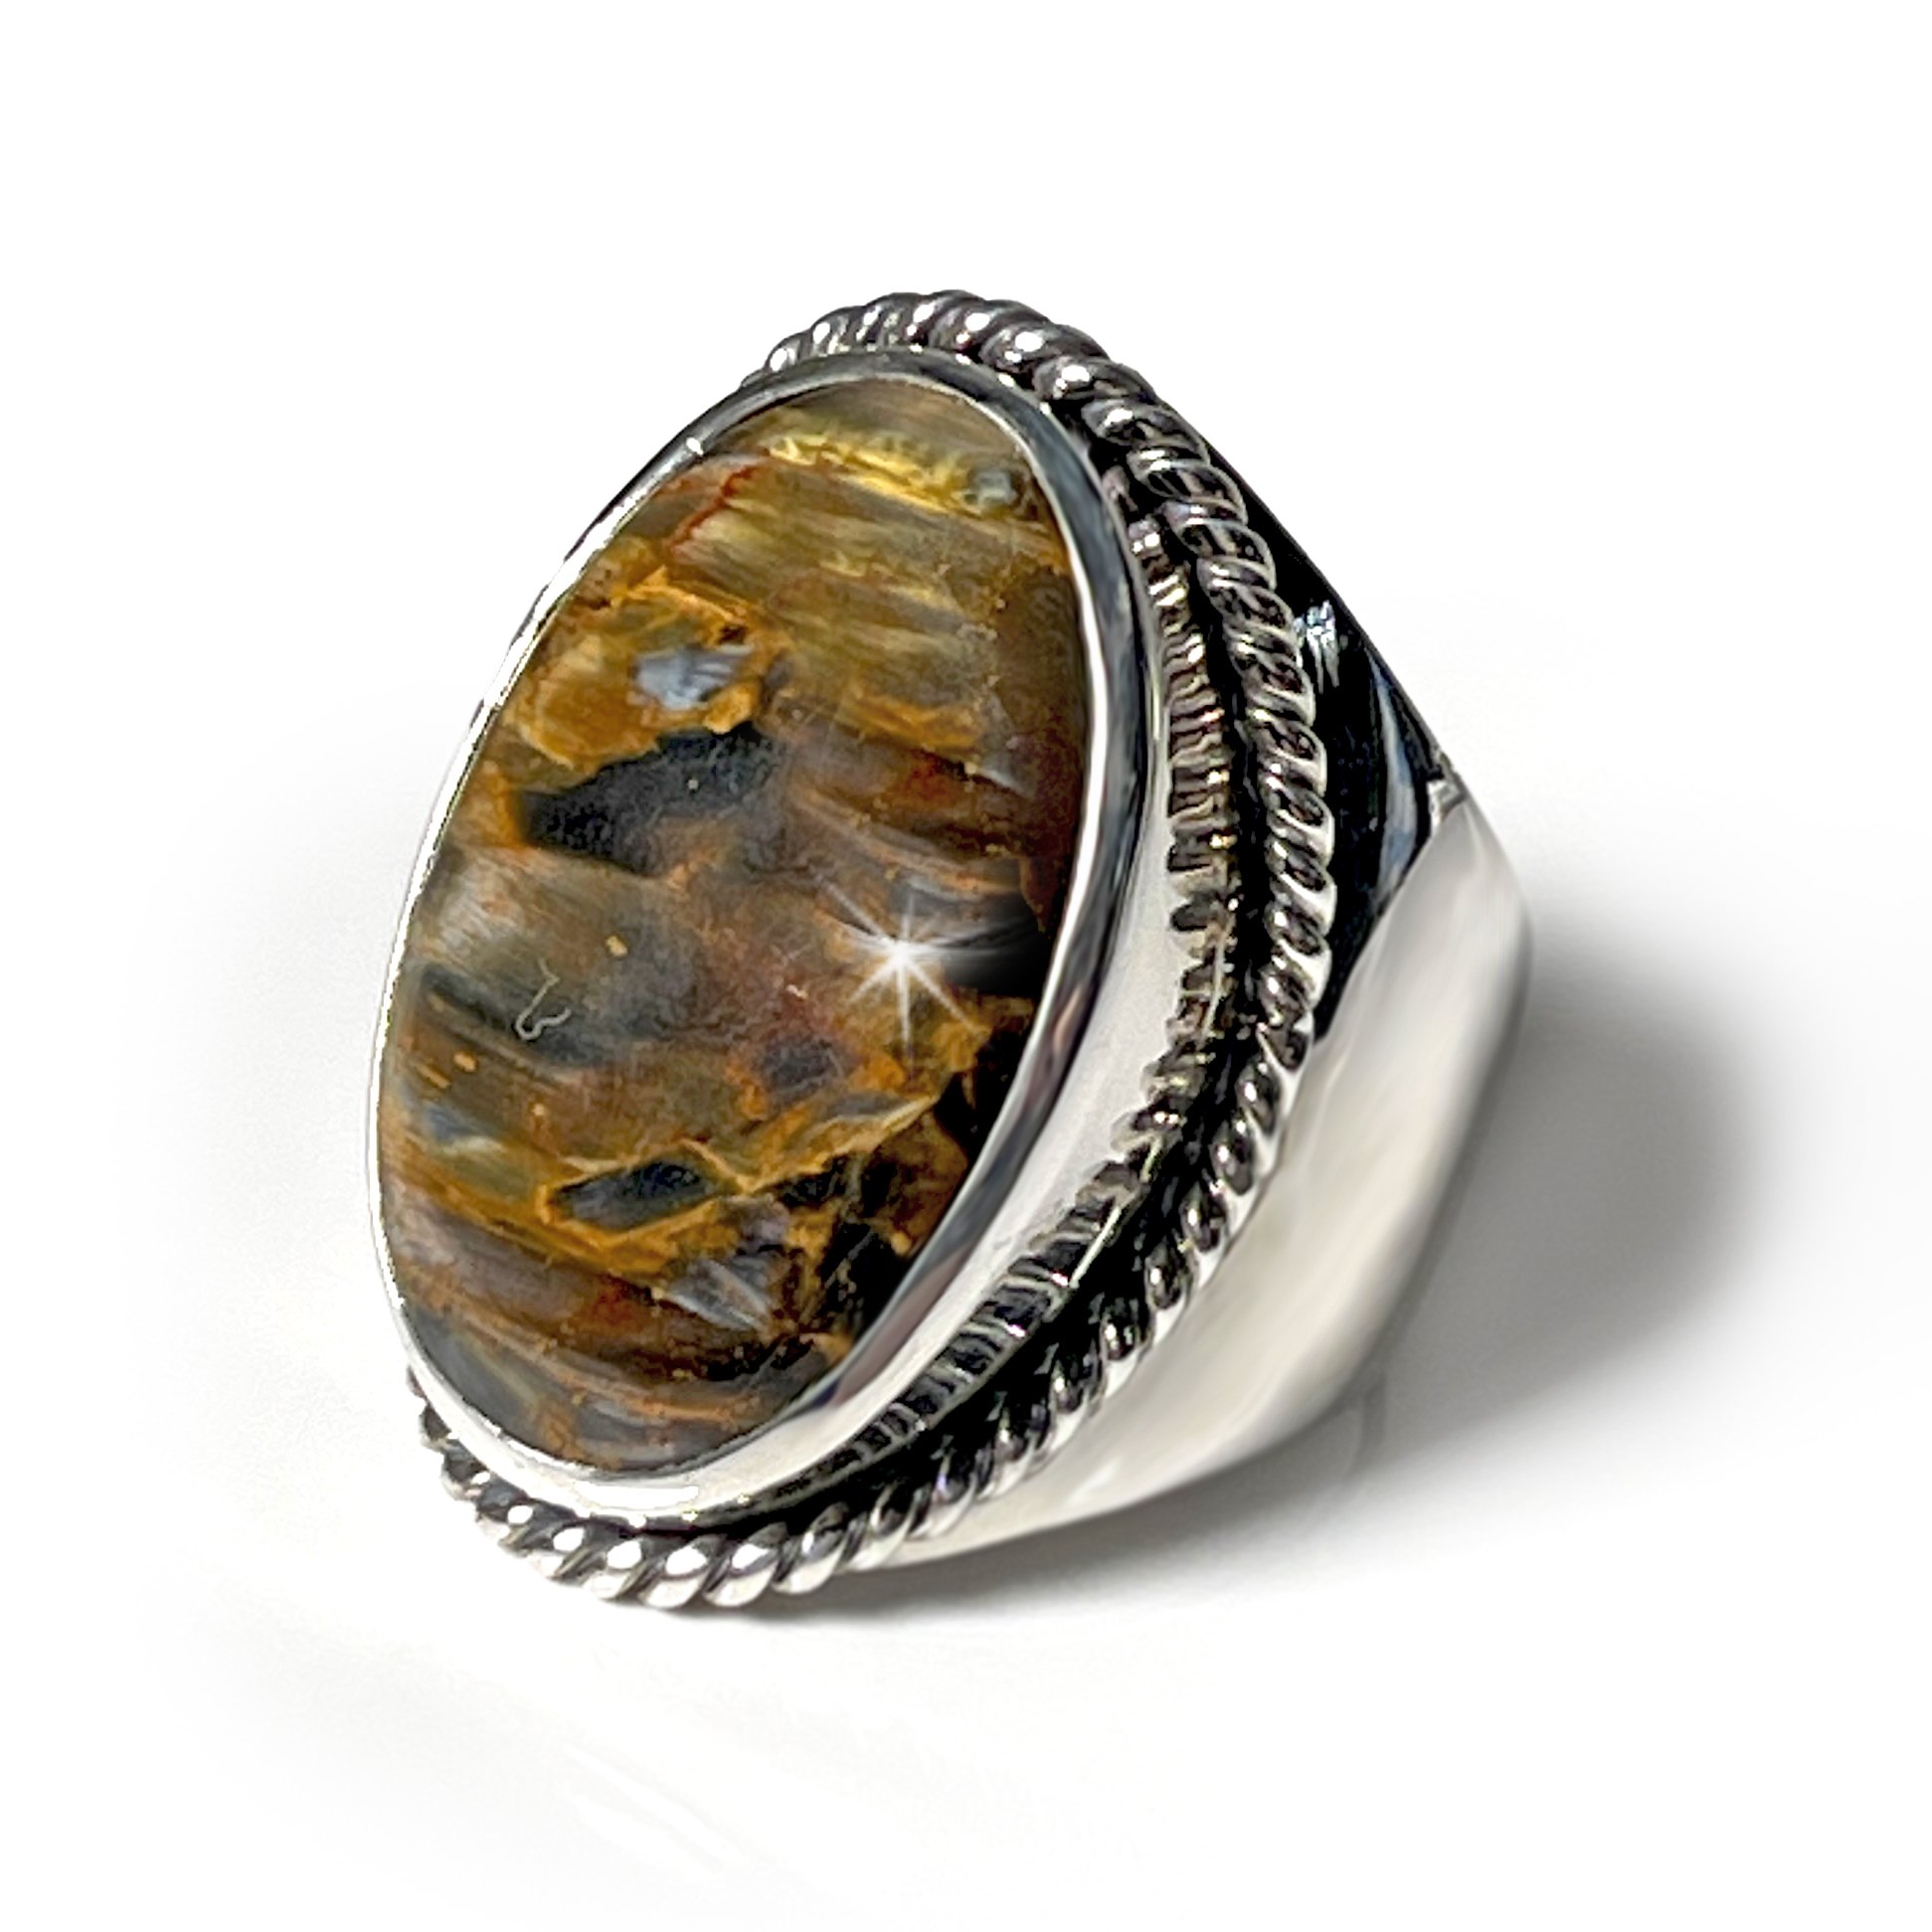 Pietersite Ring Size 11- Oval Cabochon On Raised Silver Bezel With Rope Stamped Edge On Tapered Wide Band